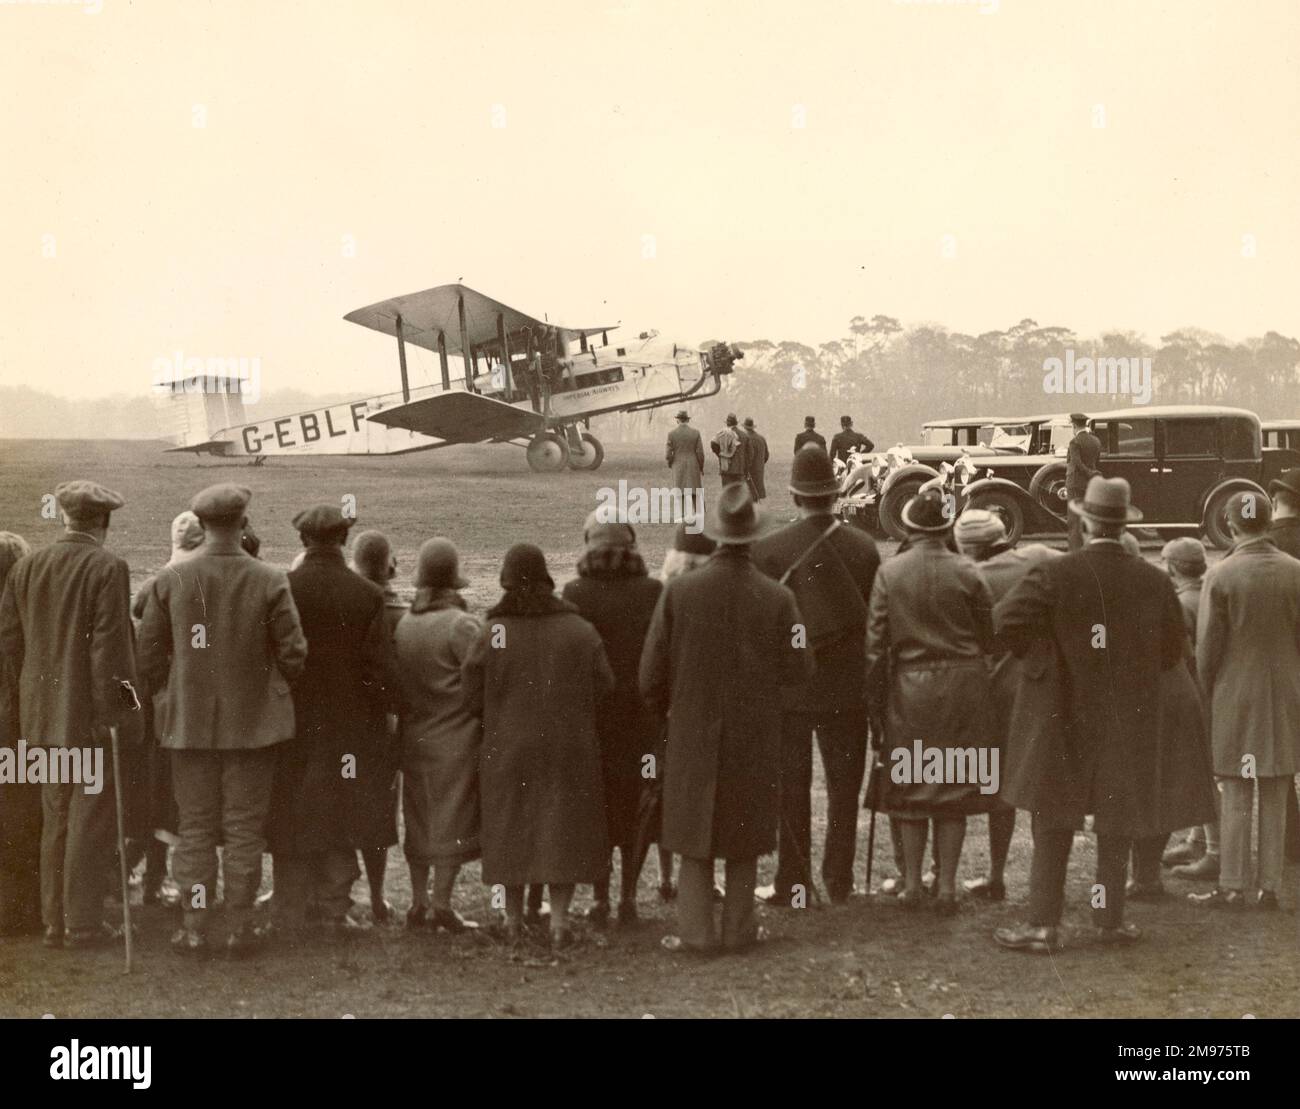 The Prince of Wales and Duke of Kent in Armstrong Whitworth Argosy I, G-EBLF, City of Glasgow, arriving from their tour of South America at Smith’s Lawn, Windsor Great Park, after their flight from Bordeaux and Paris. 29 April 1931. Stock Photo